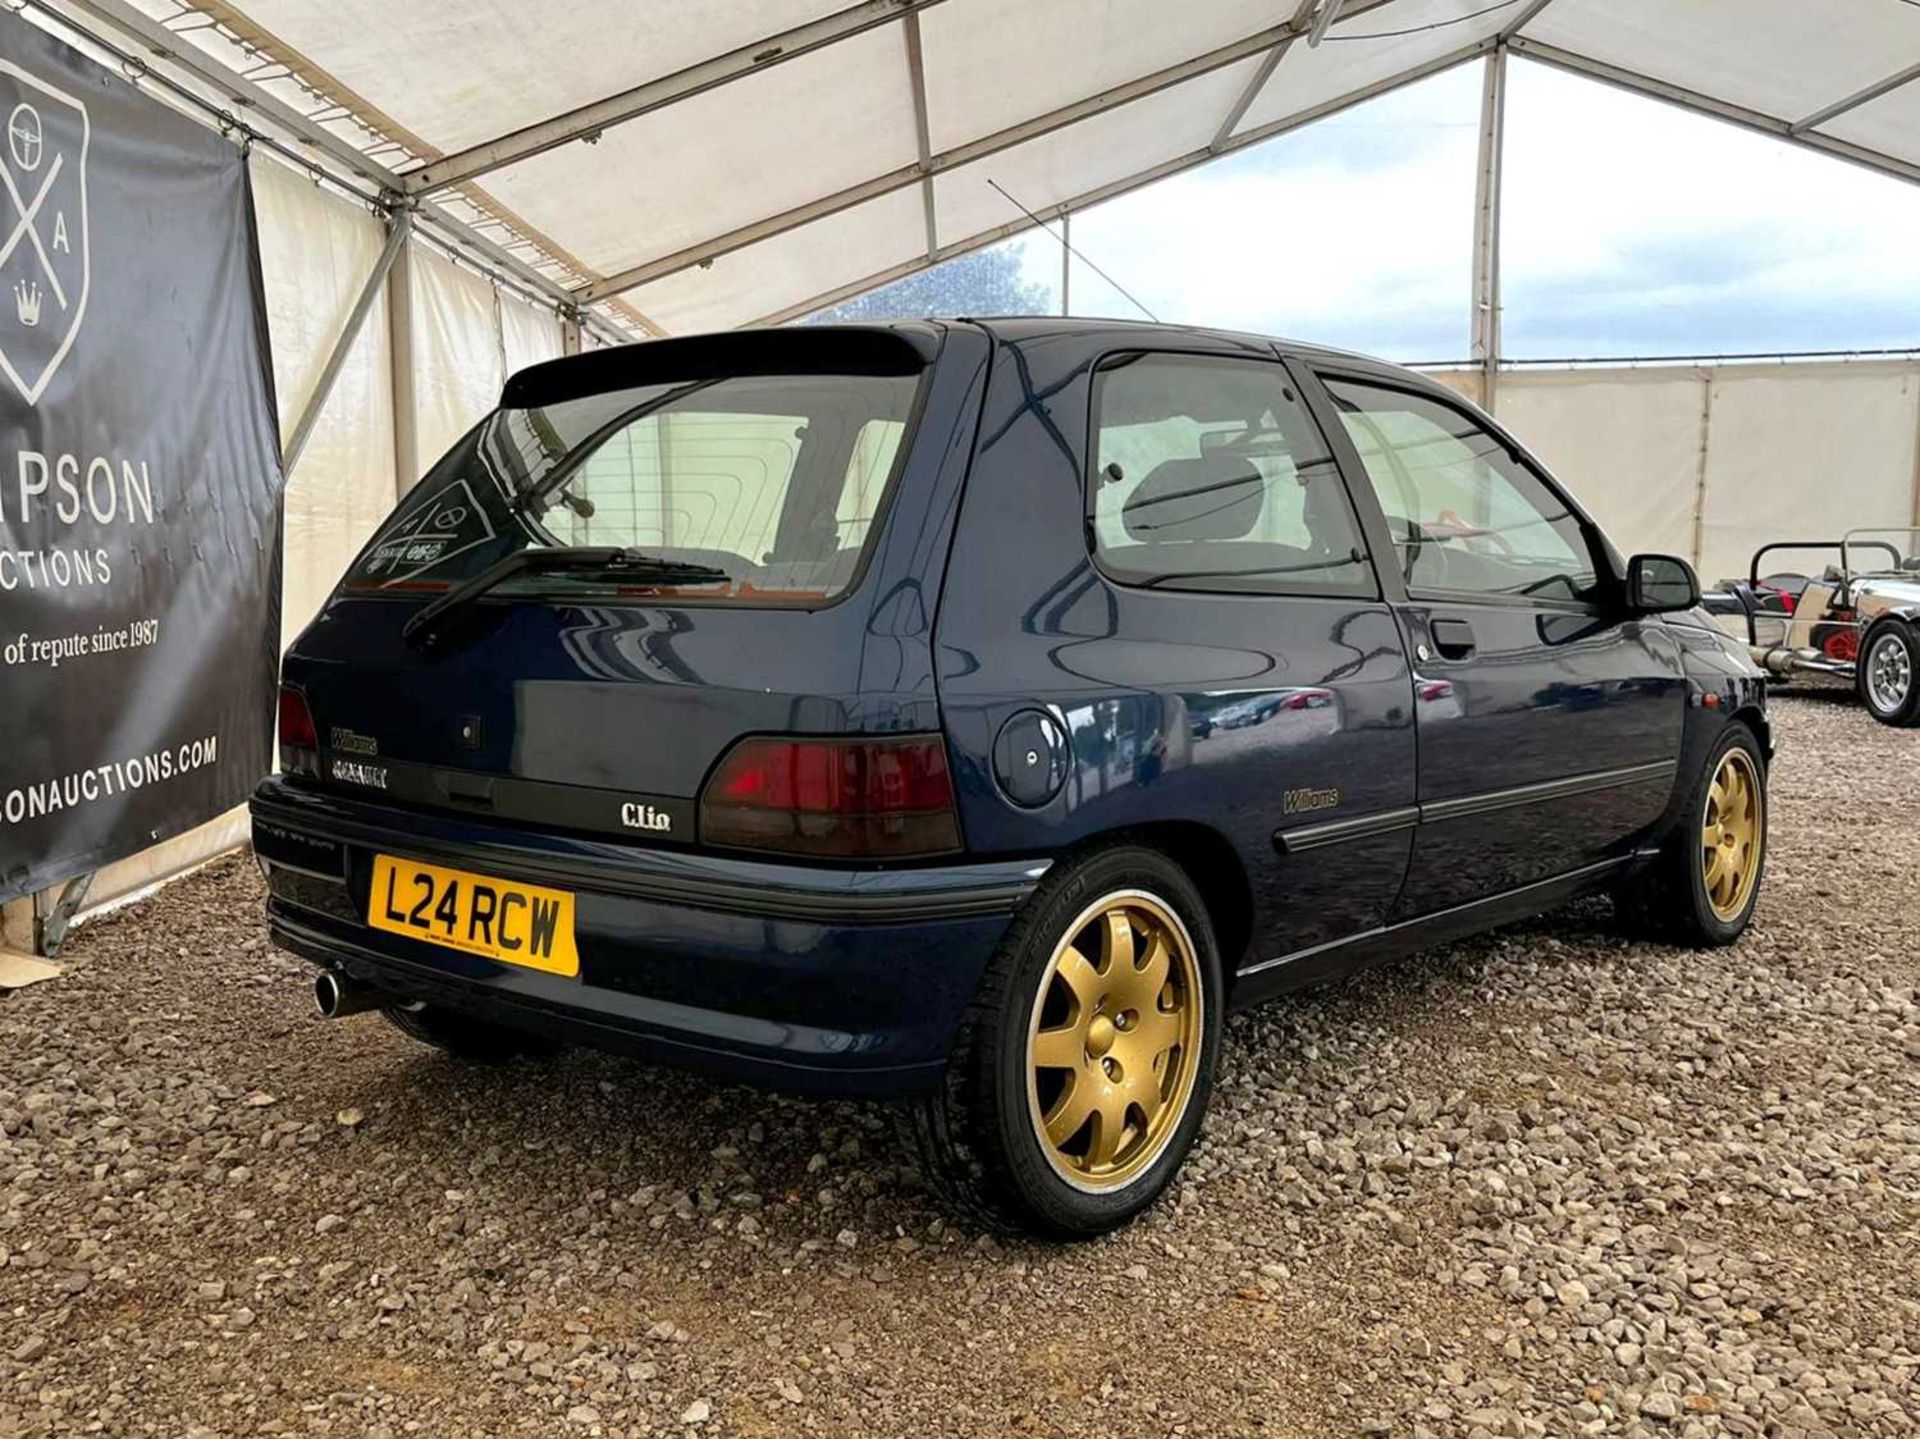 1994 Renault Clio Williams UK-delivered, first series model and said to be one of just 390 produced - Image 4 of 44